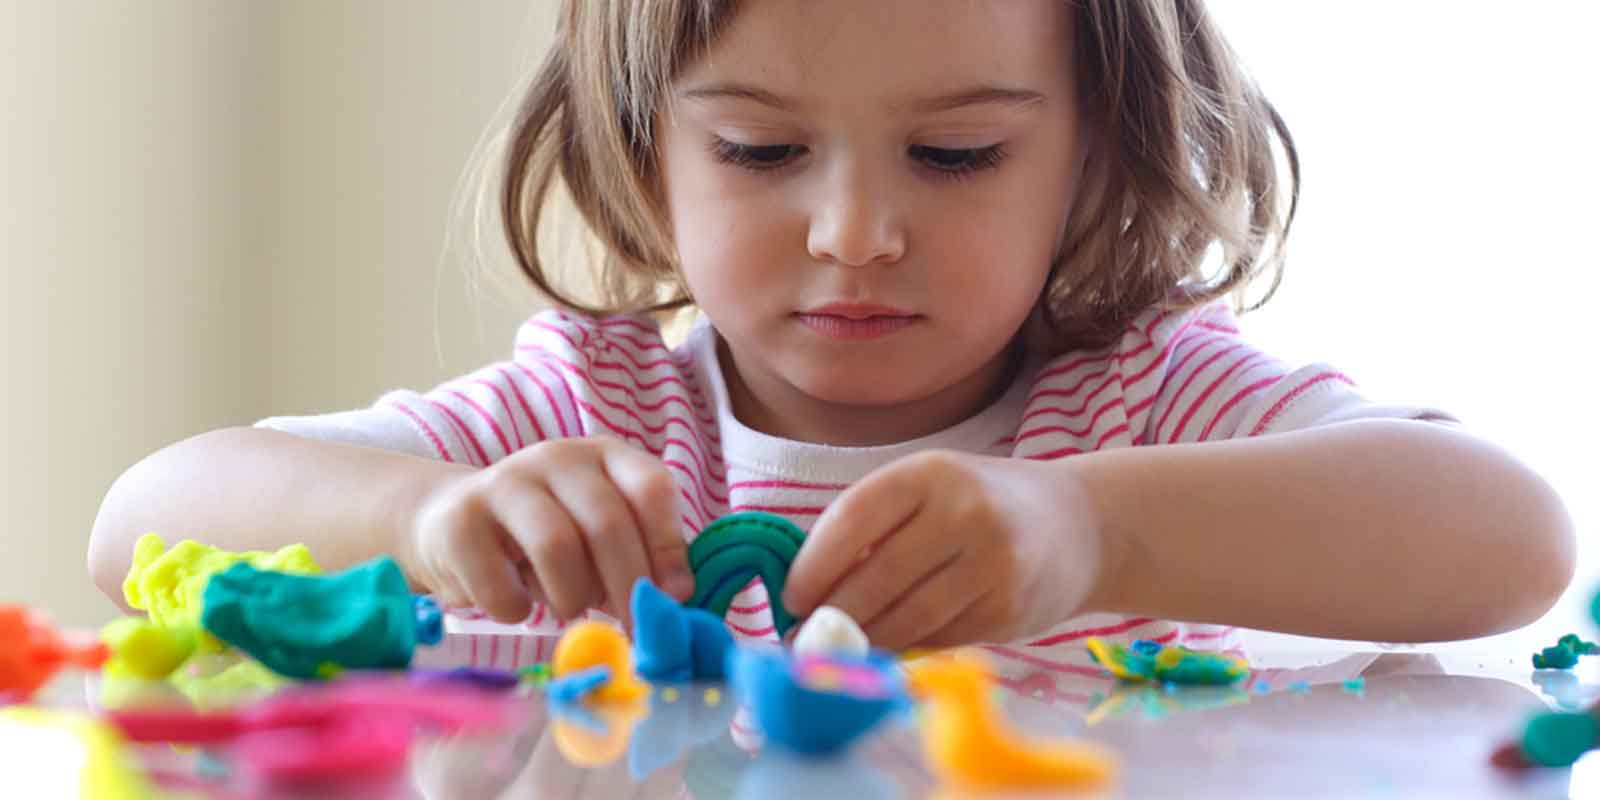 Developing Fine Motor Skills: A little girl playing with Play Dogh To Improve Motor Skills